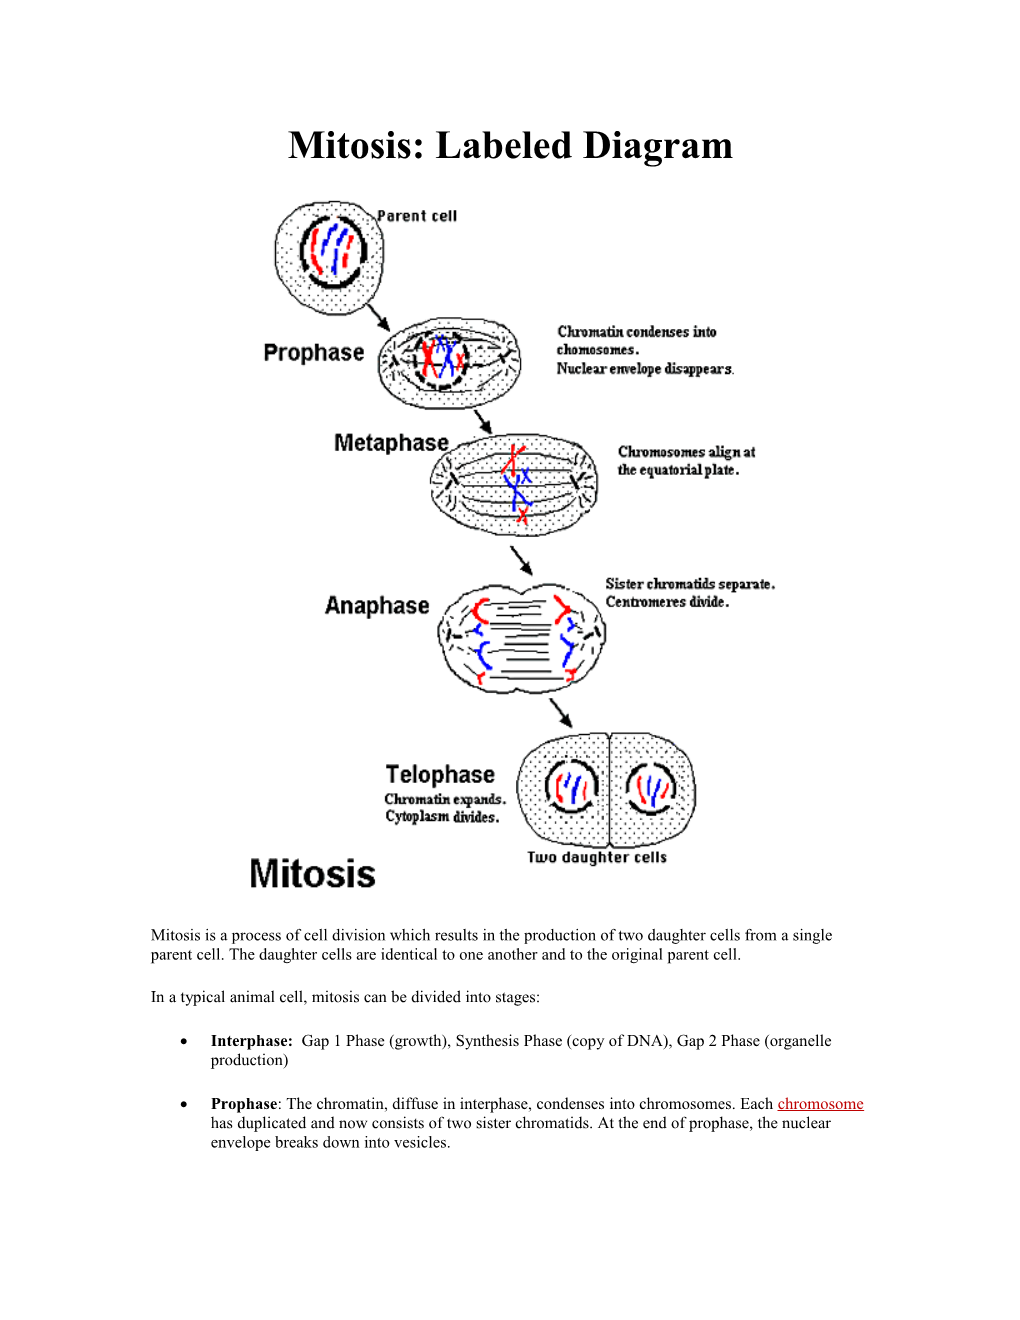 Mitosis: Labeled Diagram